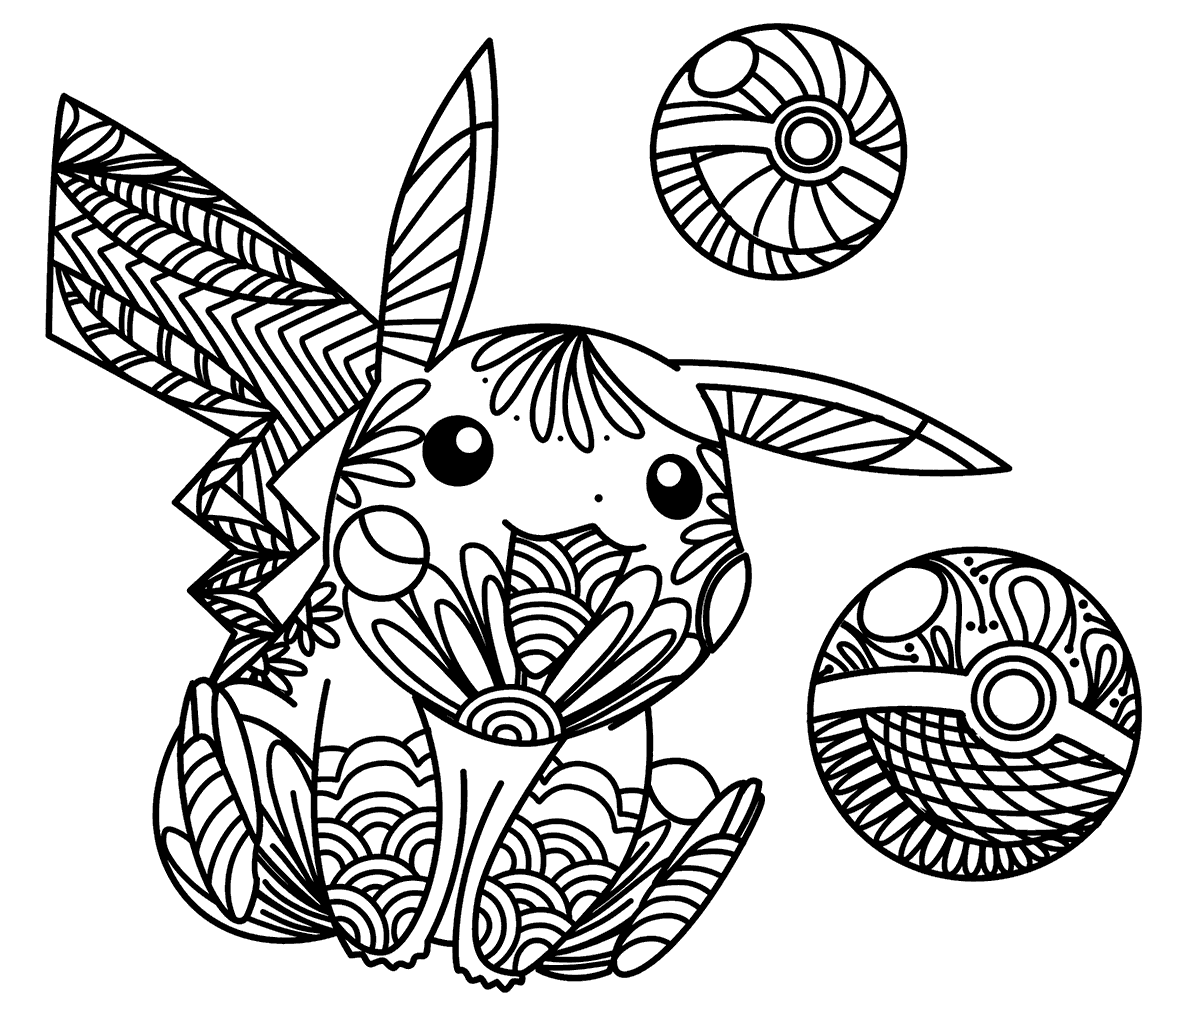 Pokemon Go Coloring Pages - Best Coloring Pages For Kids